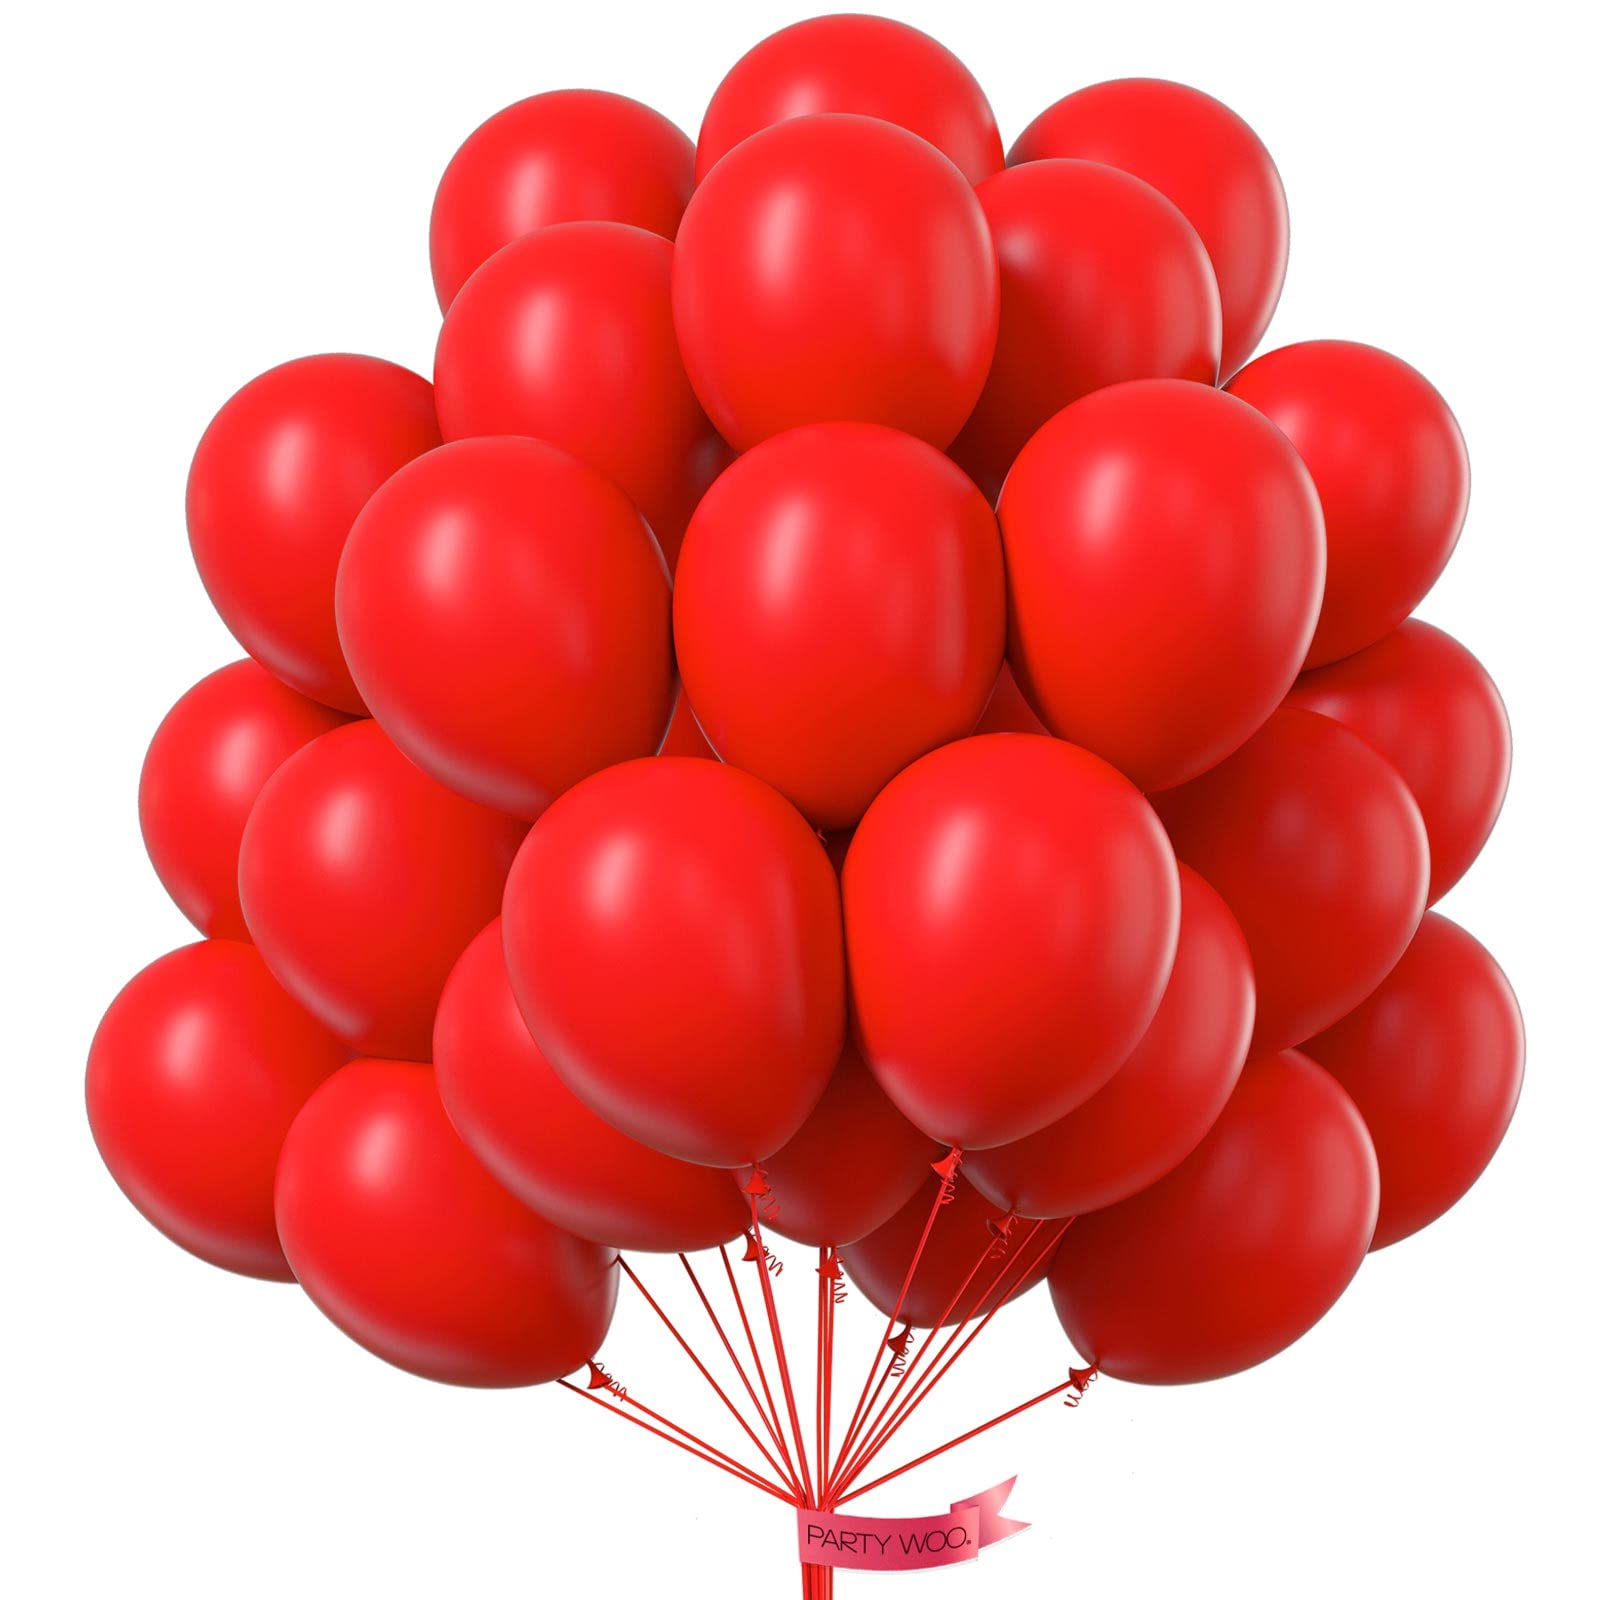 PartyWoo Red Balloons, 100 pcs 10 Inch Matte Red Balloons, Red Latex Balloons for Balloon garland or Balloon Arch as Birthday Pa